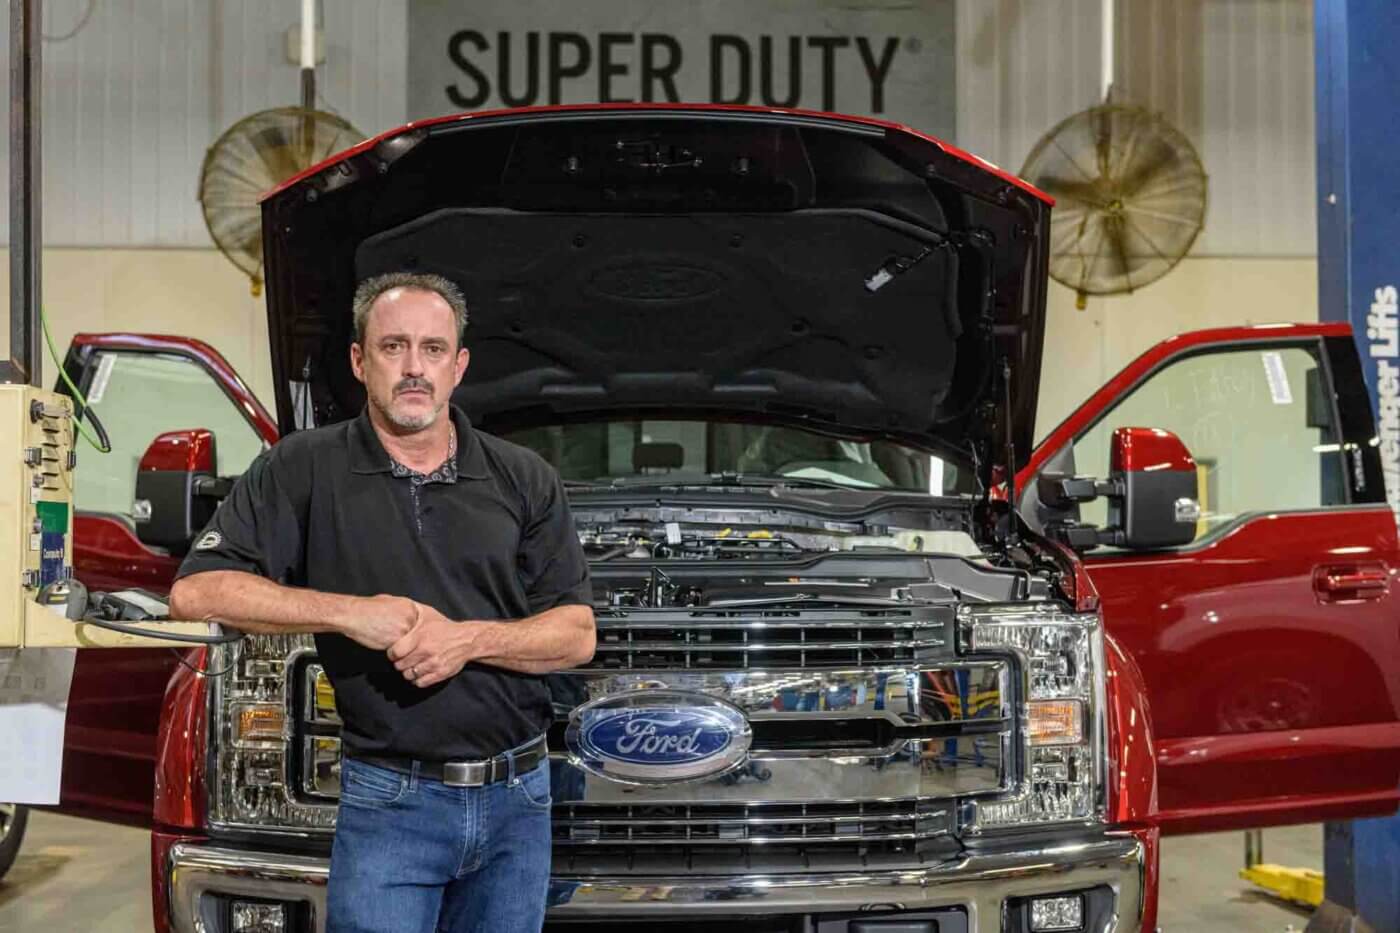 Todd Dunn, president of UAW Local 862, photographed Friday, June 28, 2019 at the Ford Motor Company’s Kentucky Truck Plant at 3001 Chamberlain Lane in Louisville, Ky., for Automotive News. (Photo by Brian Bohannon)